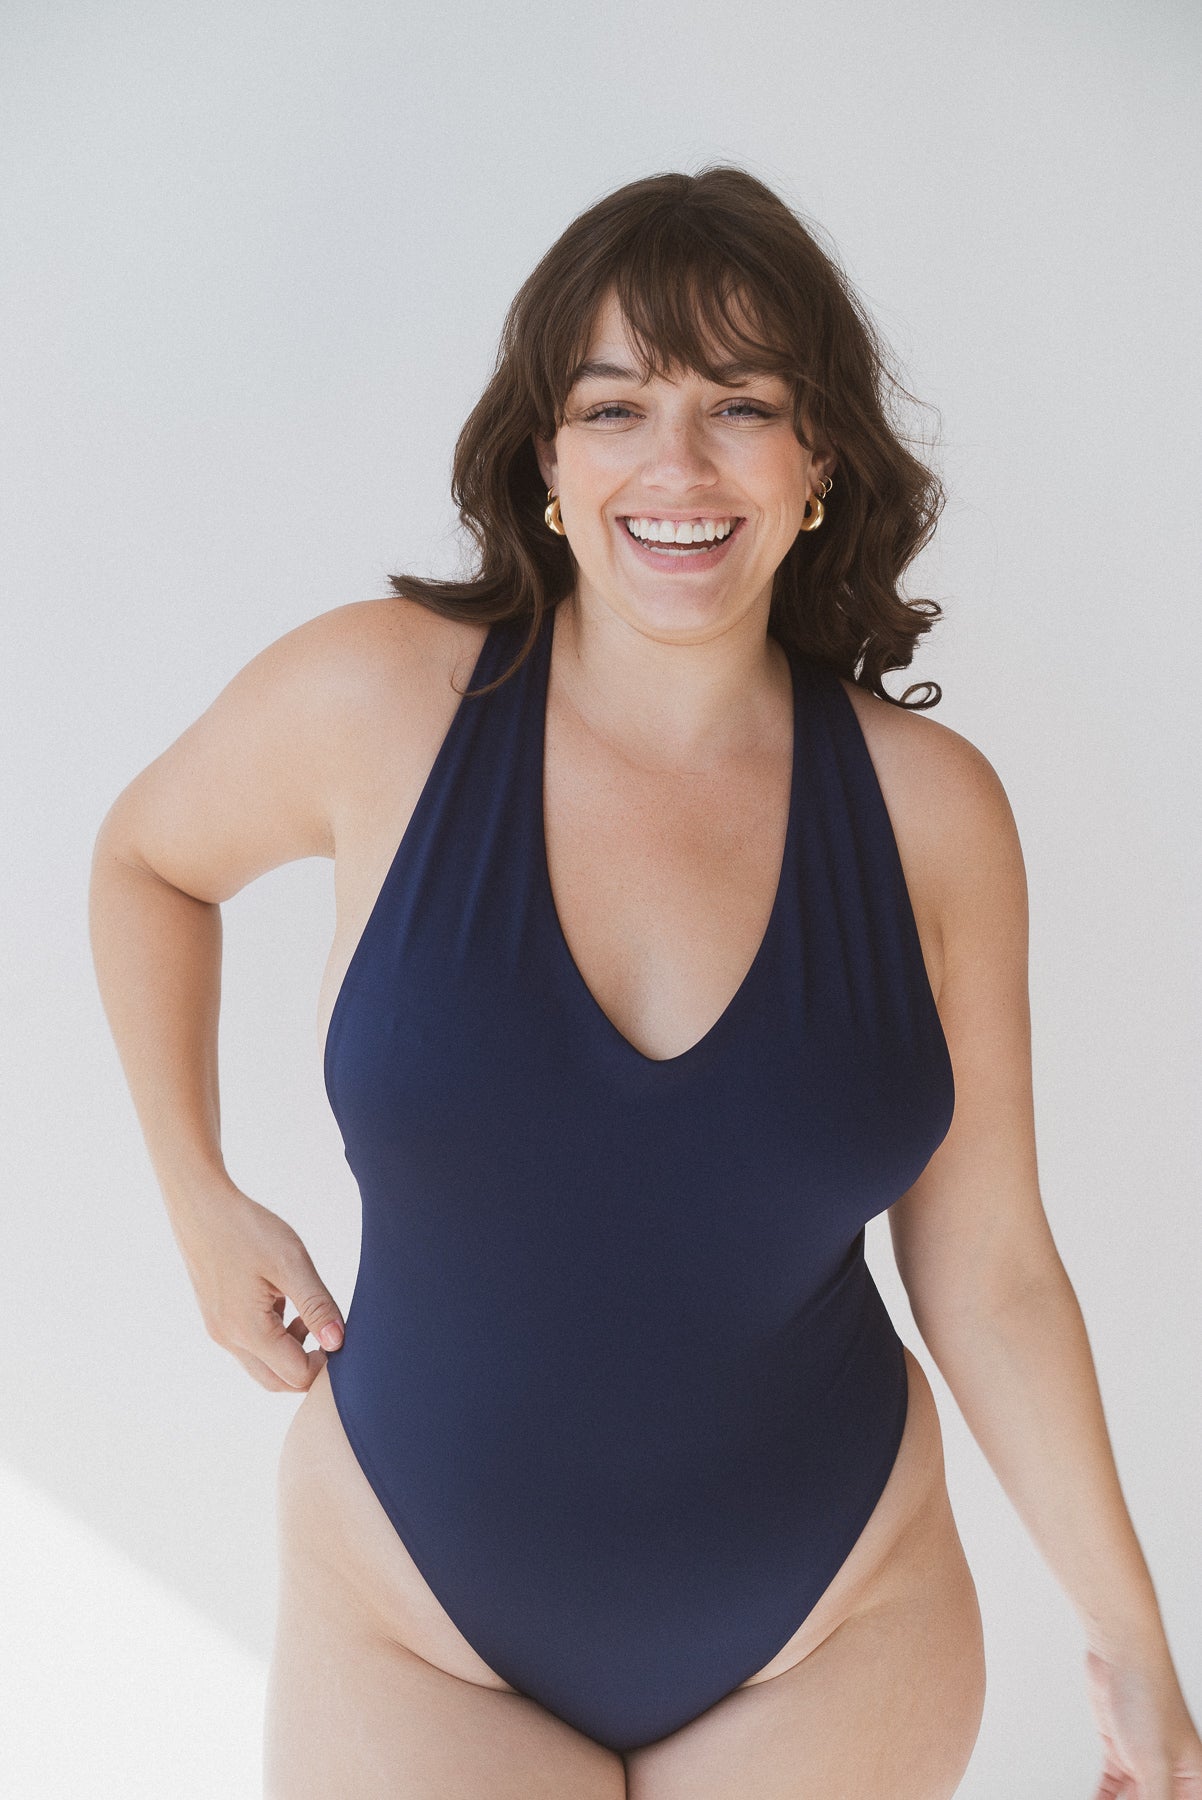 The Perfect Wrap One-Piece - Sky & Blue Mountain